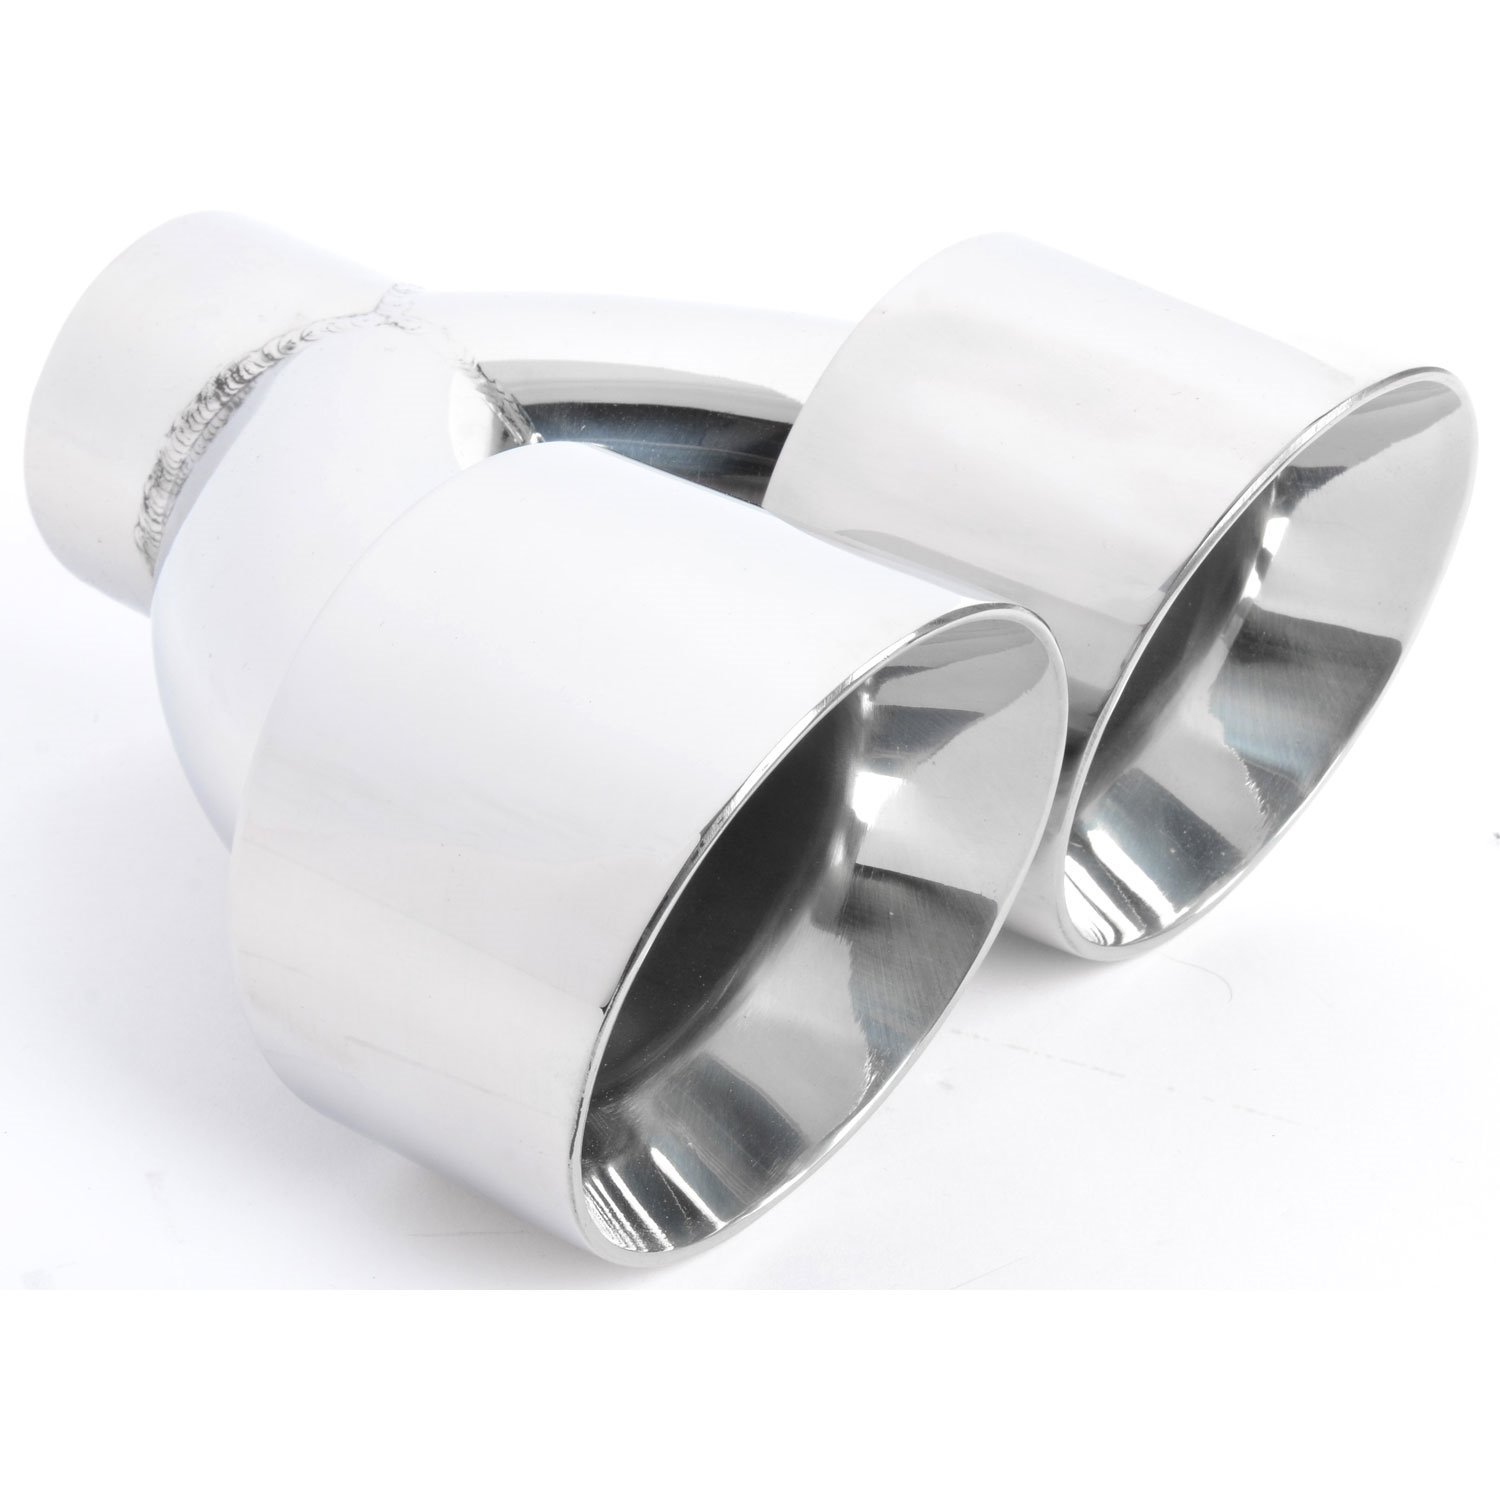 Stainless Dual Exhaust Tip Overall Length: 7 7/8